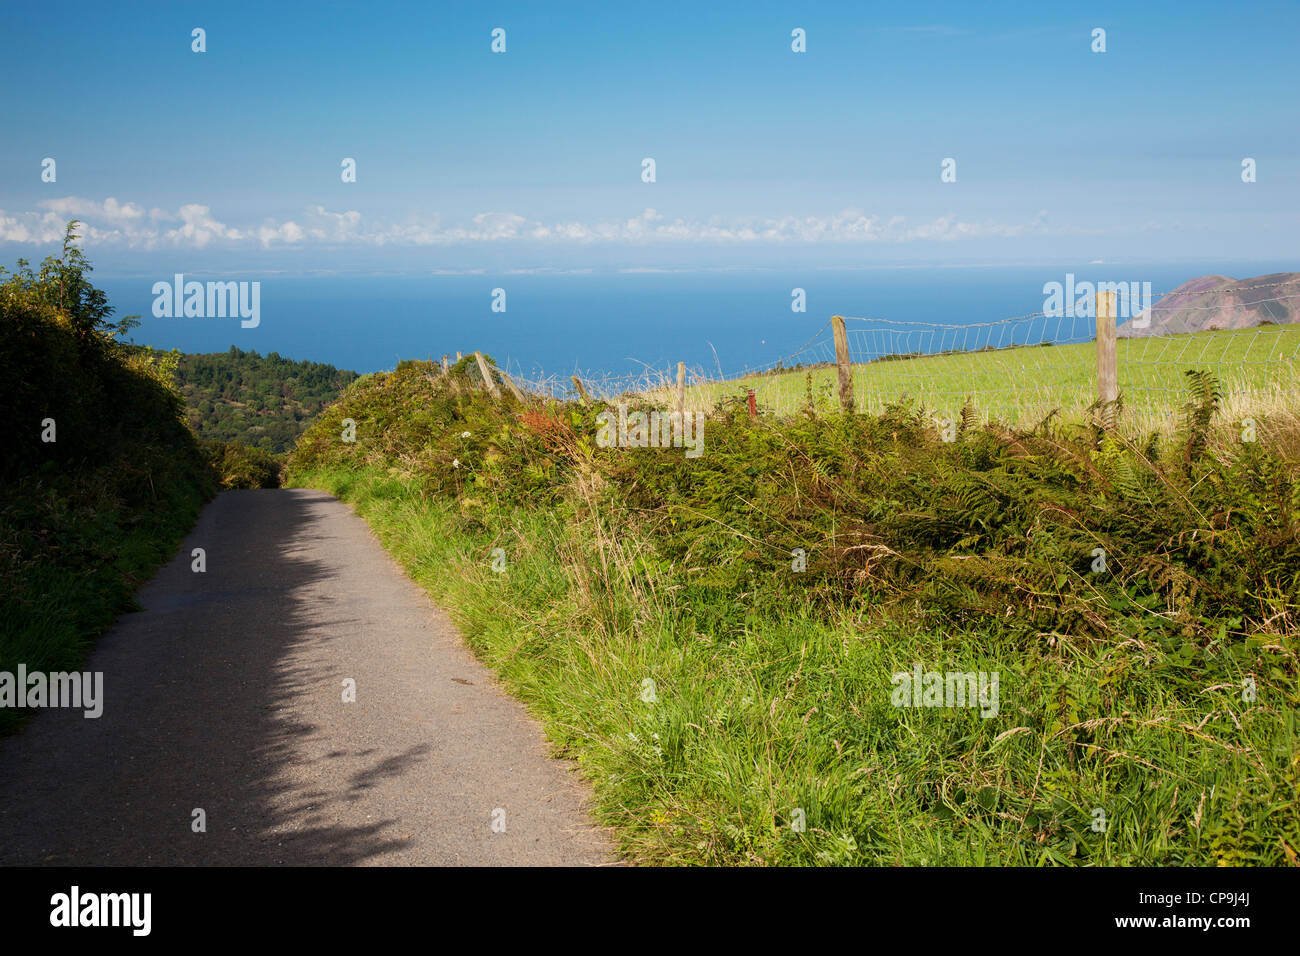 View down a single track country road with hedges both sides looking towards the sea. Stock Photo